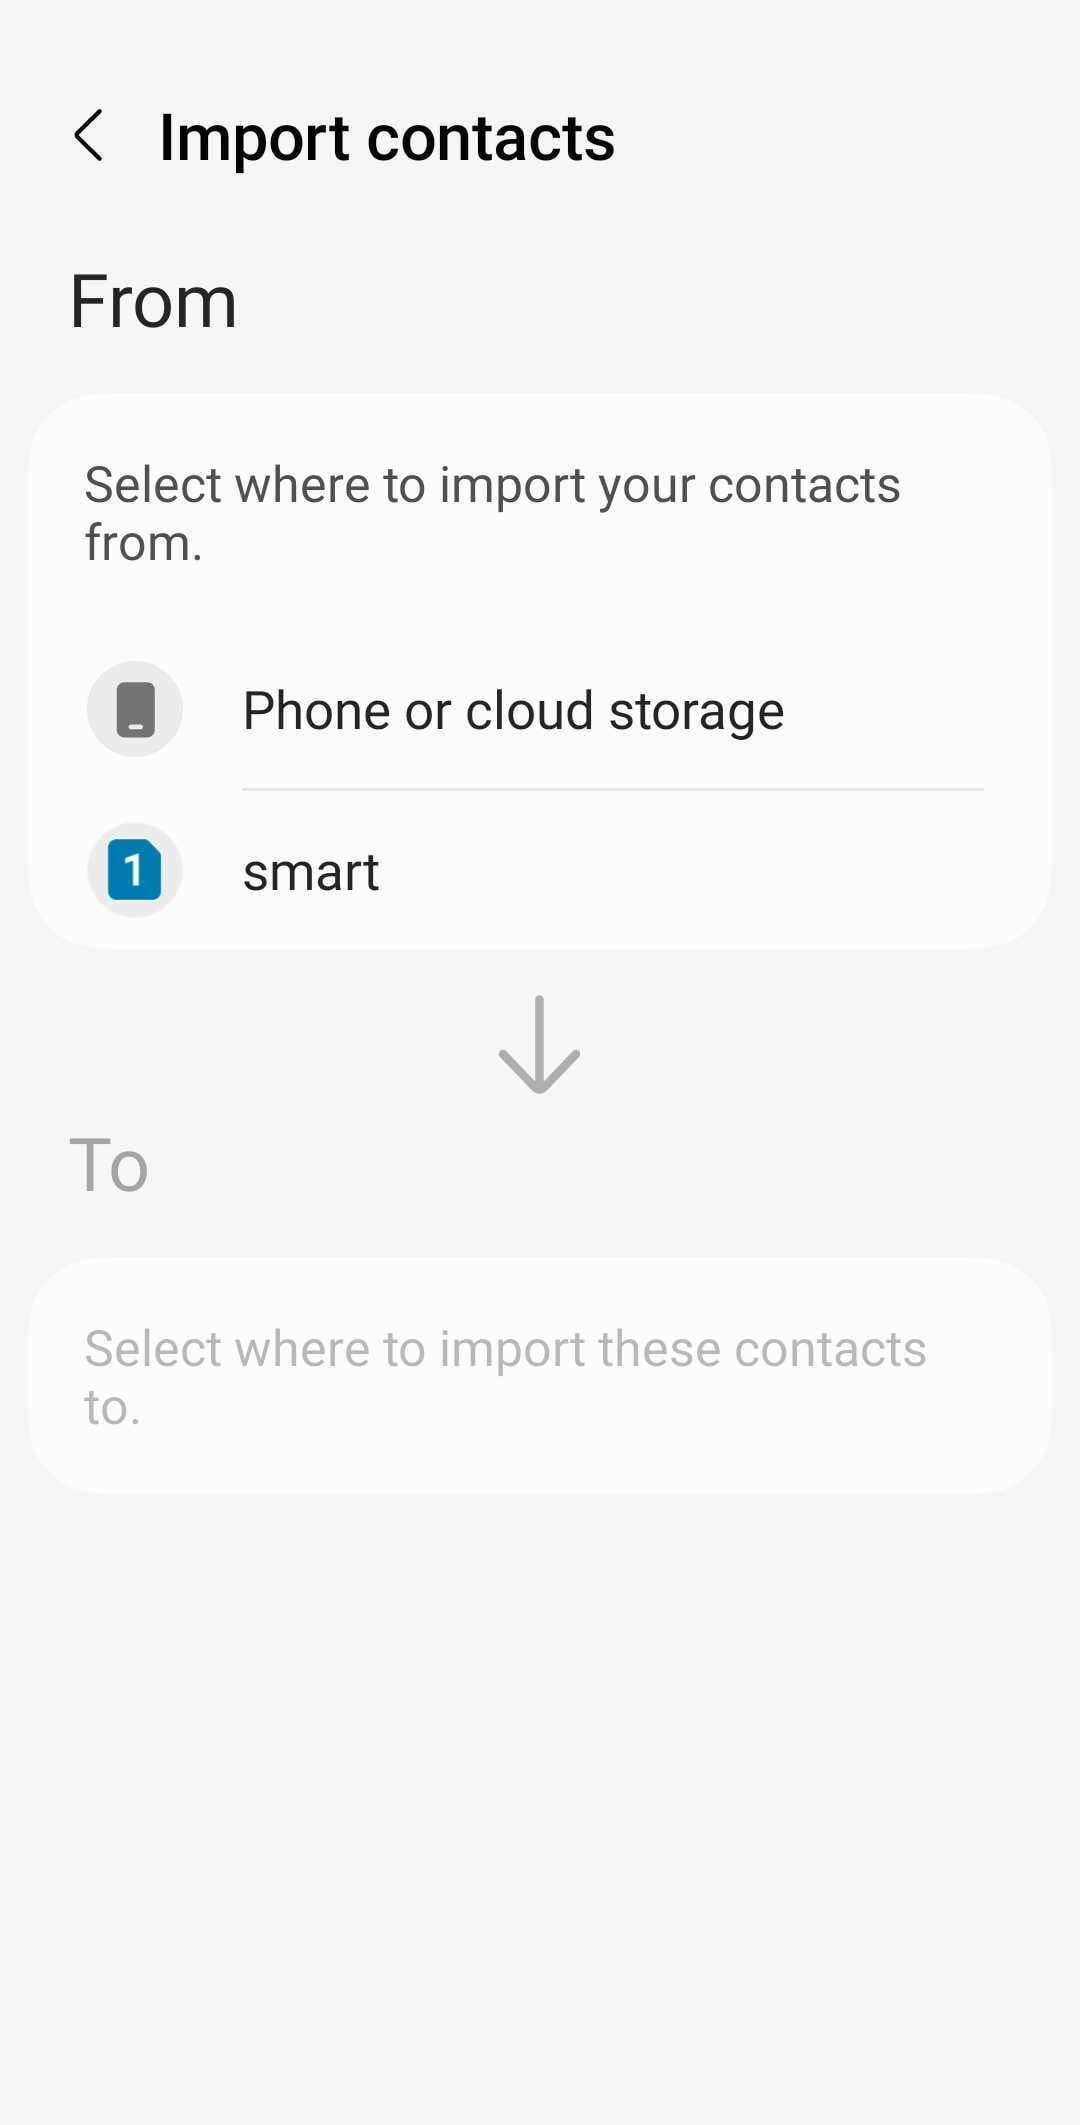 choose where to import contacts